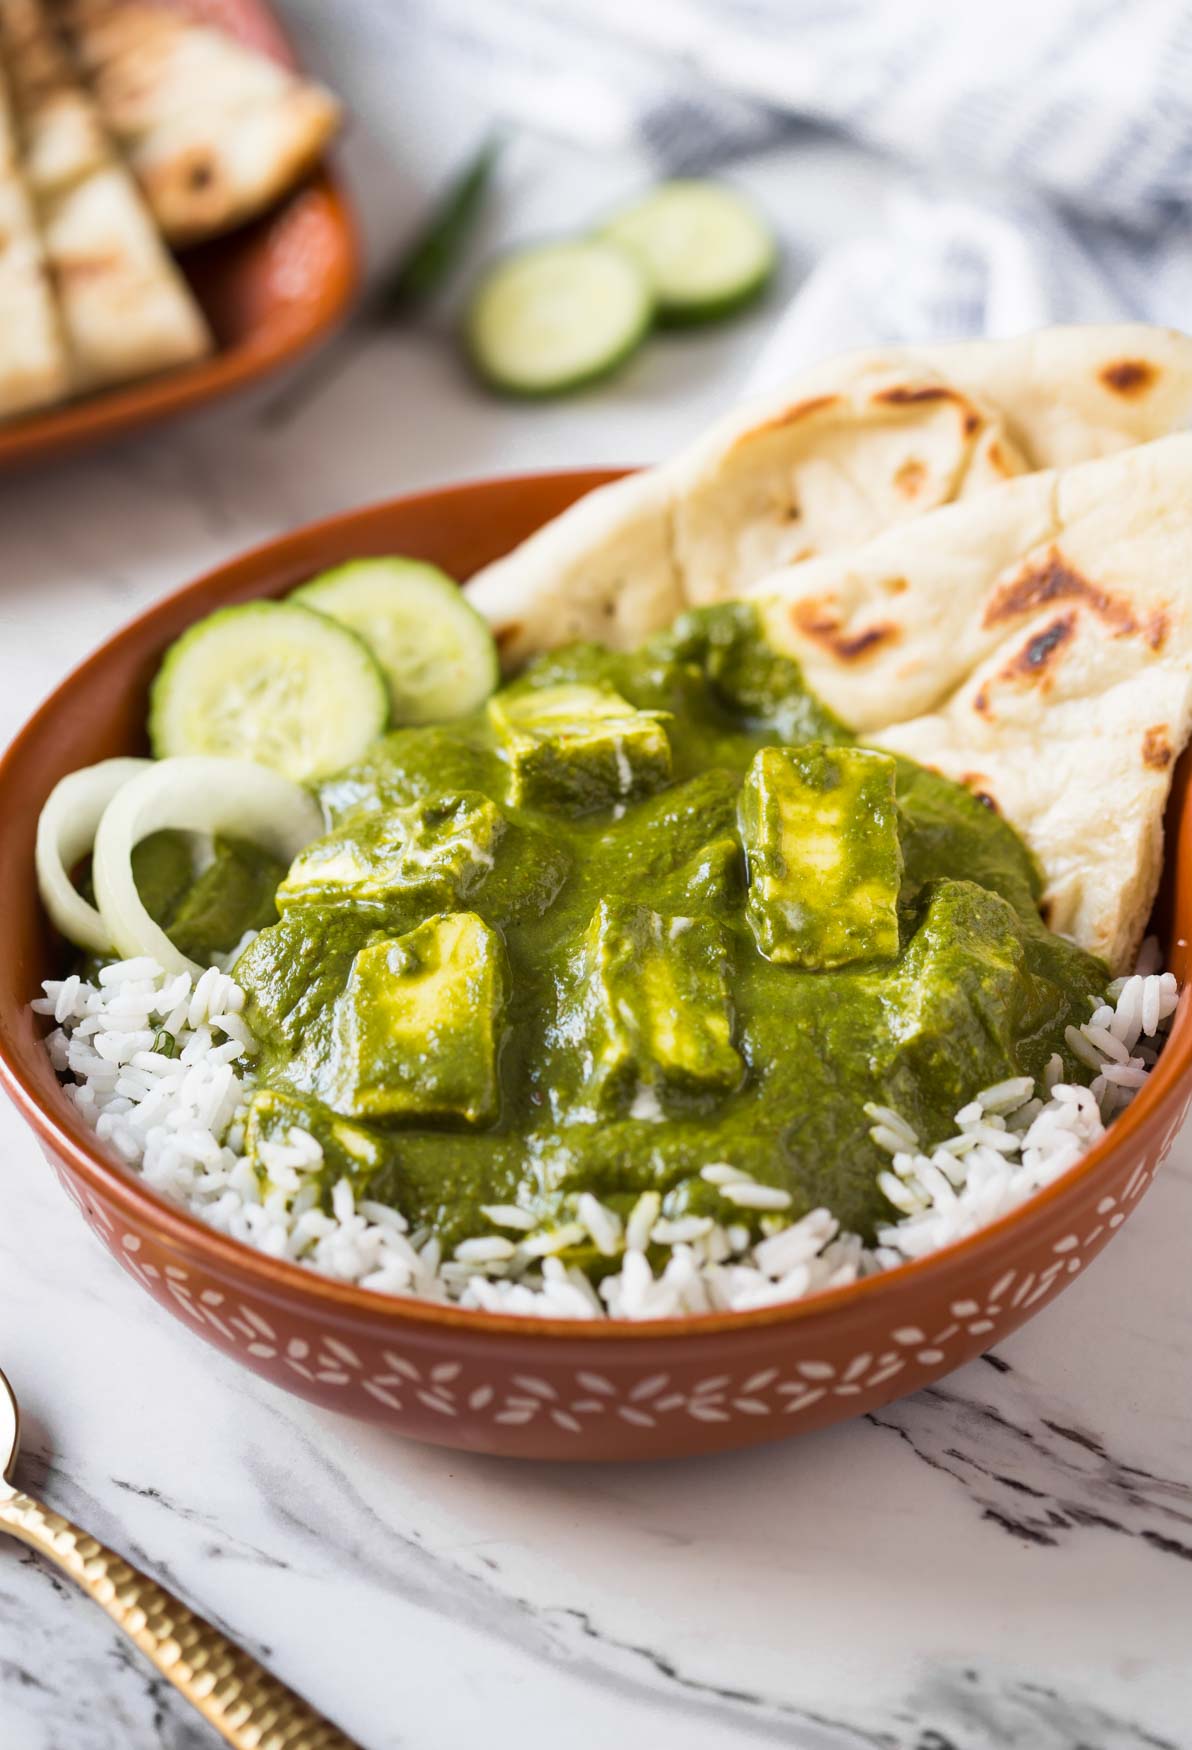 Palak paneer curry over a bed of rice with naan bread in a serving dish.